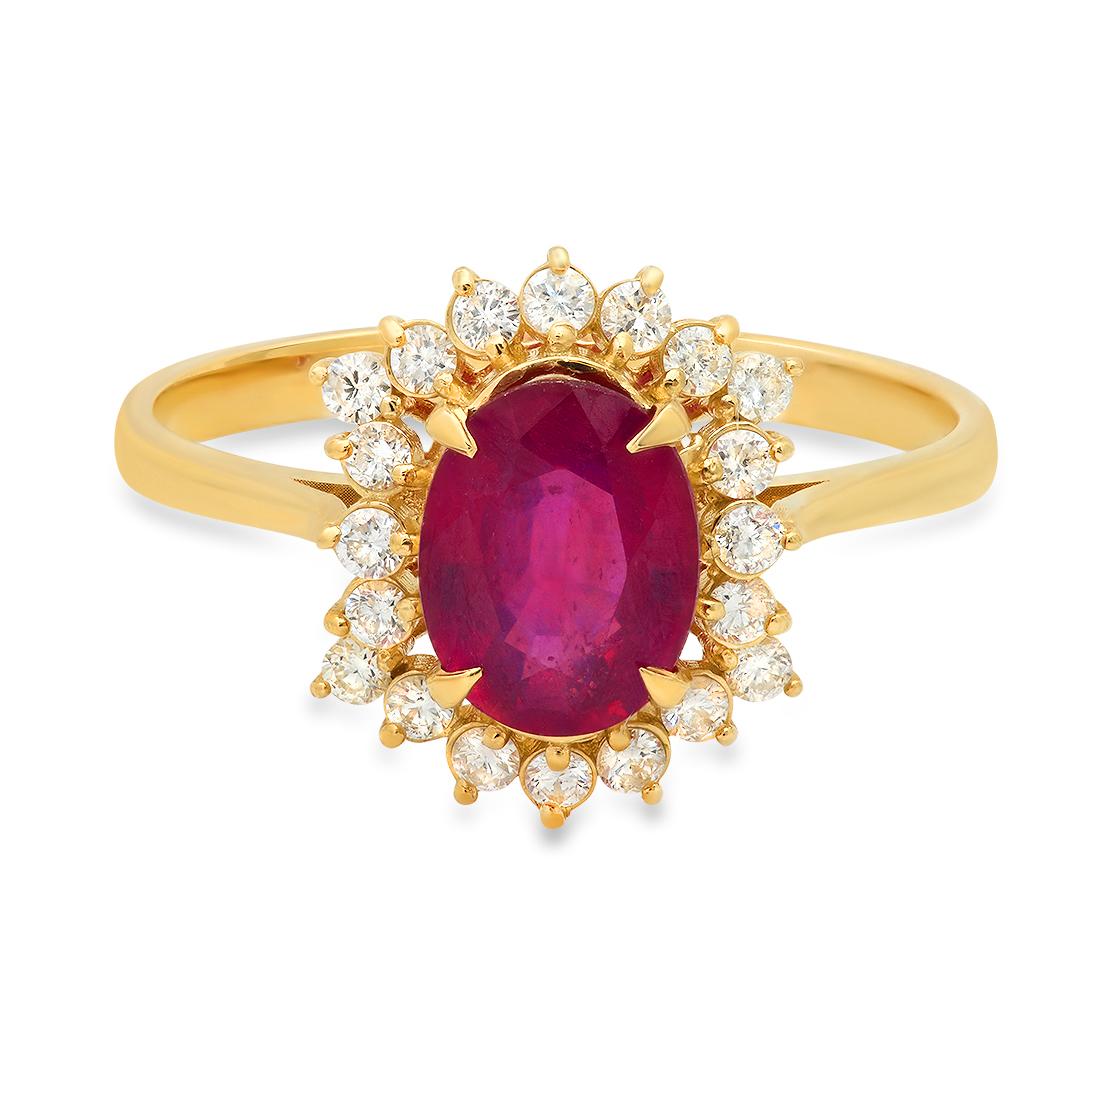 14K Yellow Gold 2.50ct Ruby and 0.90ct Diamond Ring